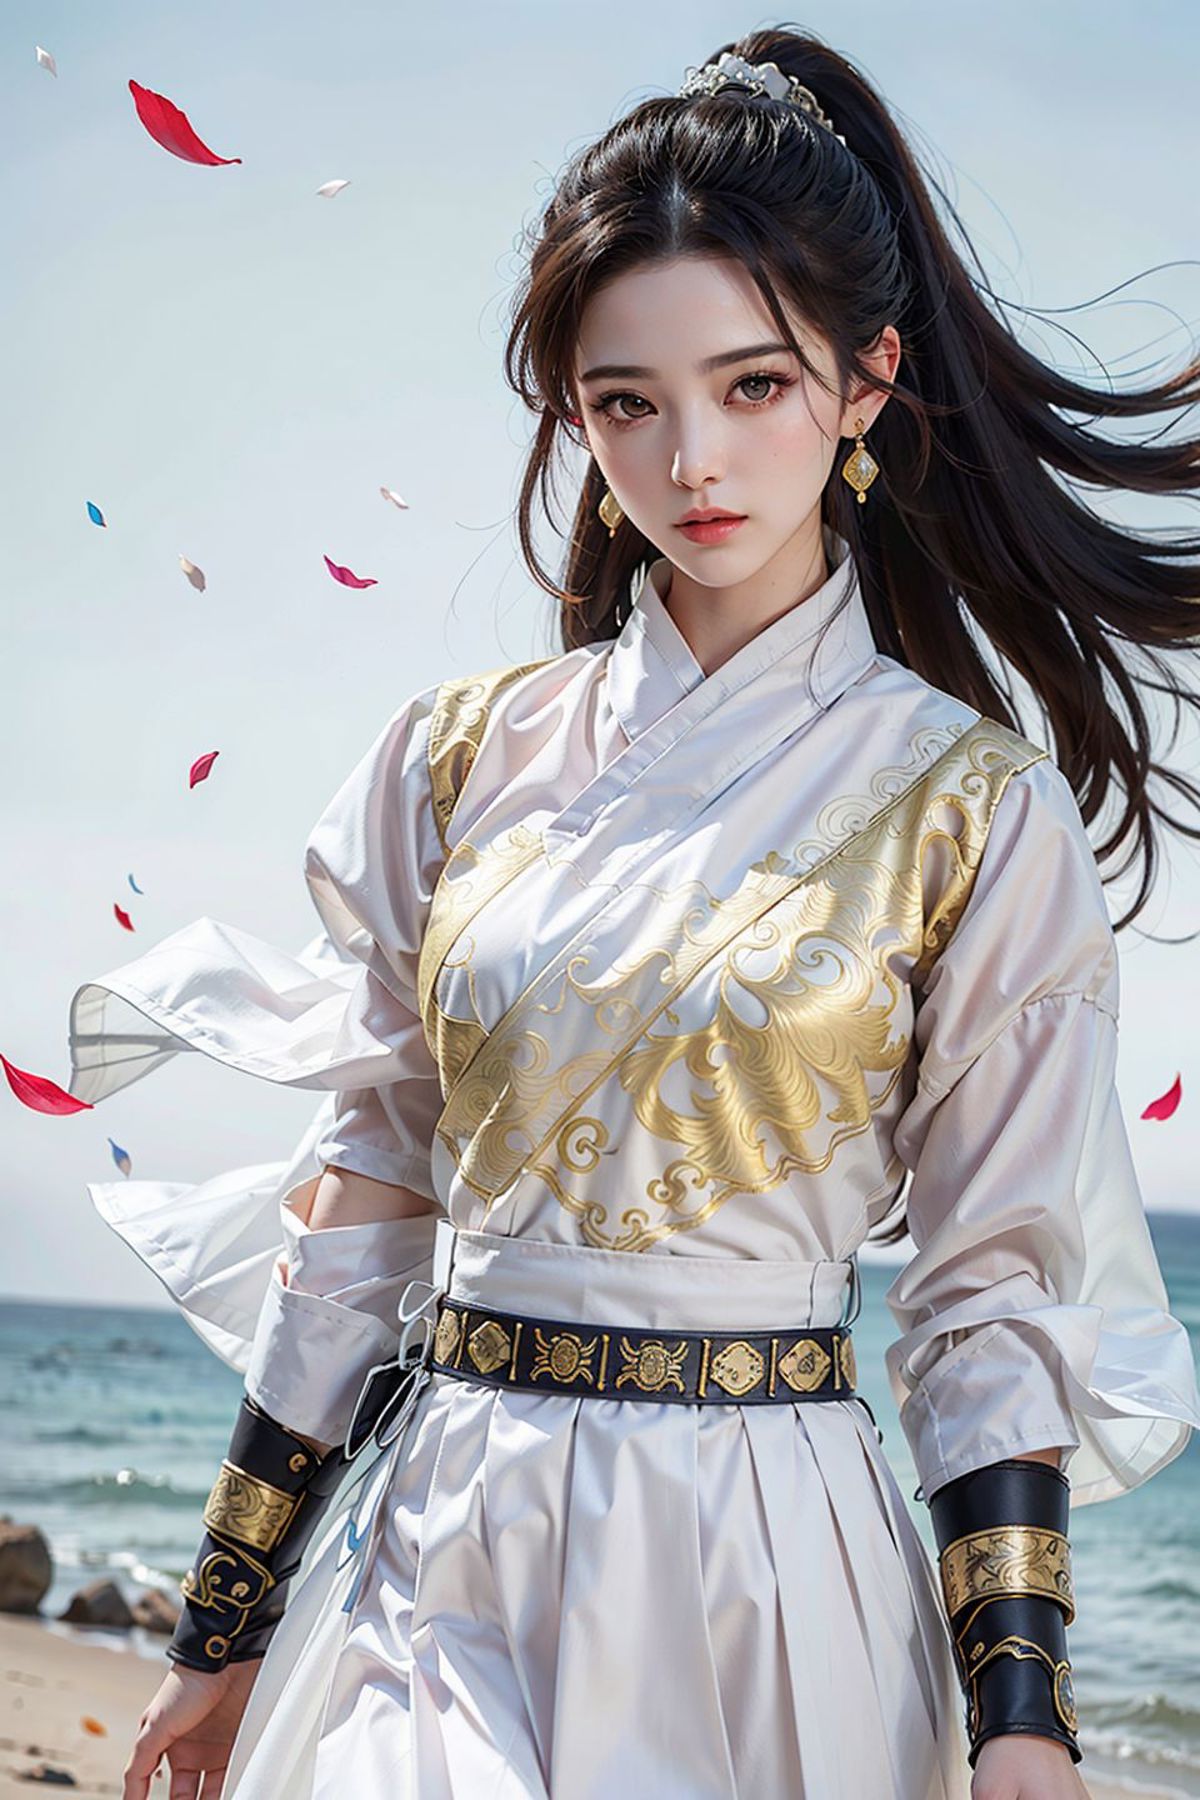 Chinese clothing, Feiyu outfit飞鱼服 image by ylnnn